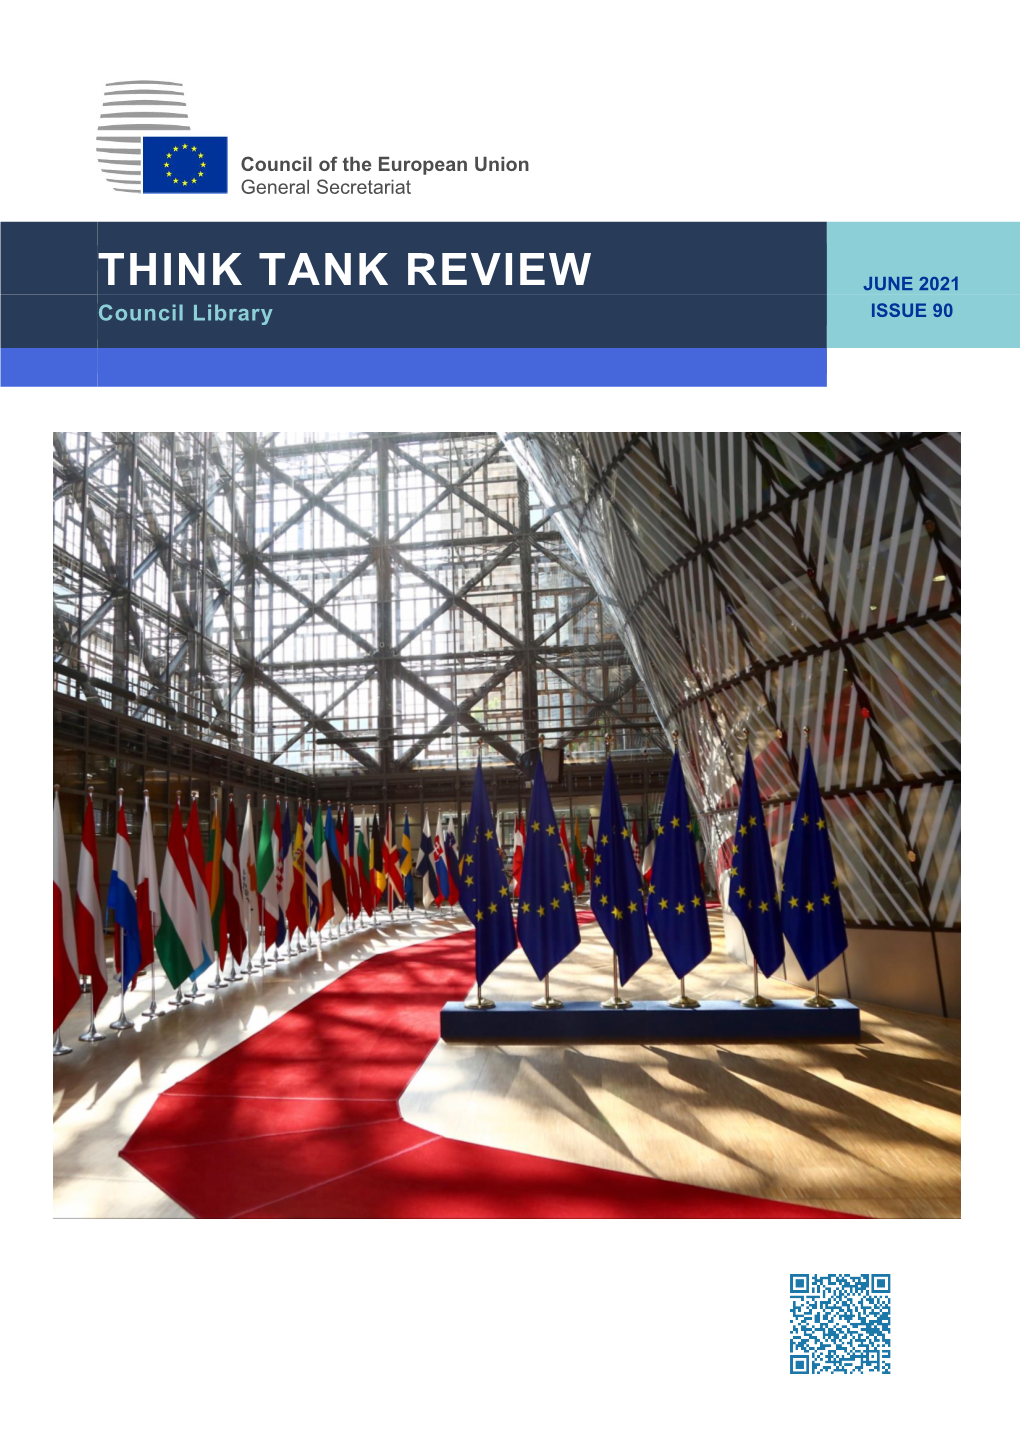 THINK TANK REVIEW JUNE 2021 Council Library ISSUE 90